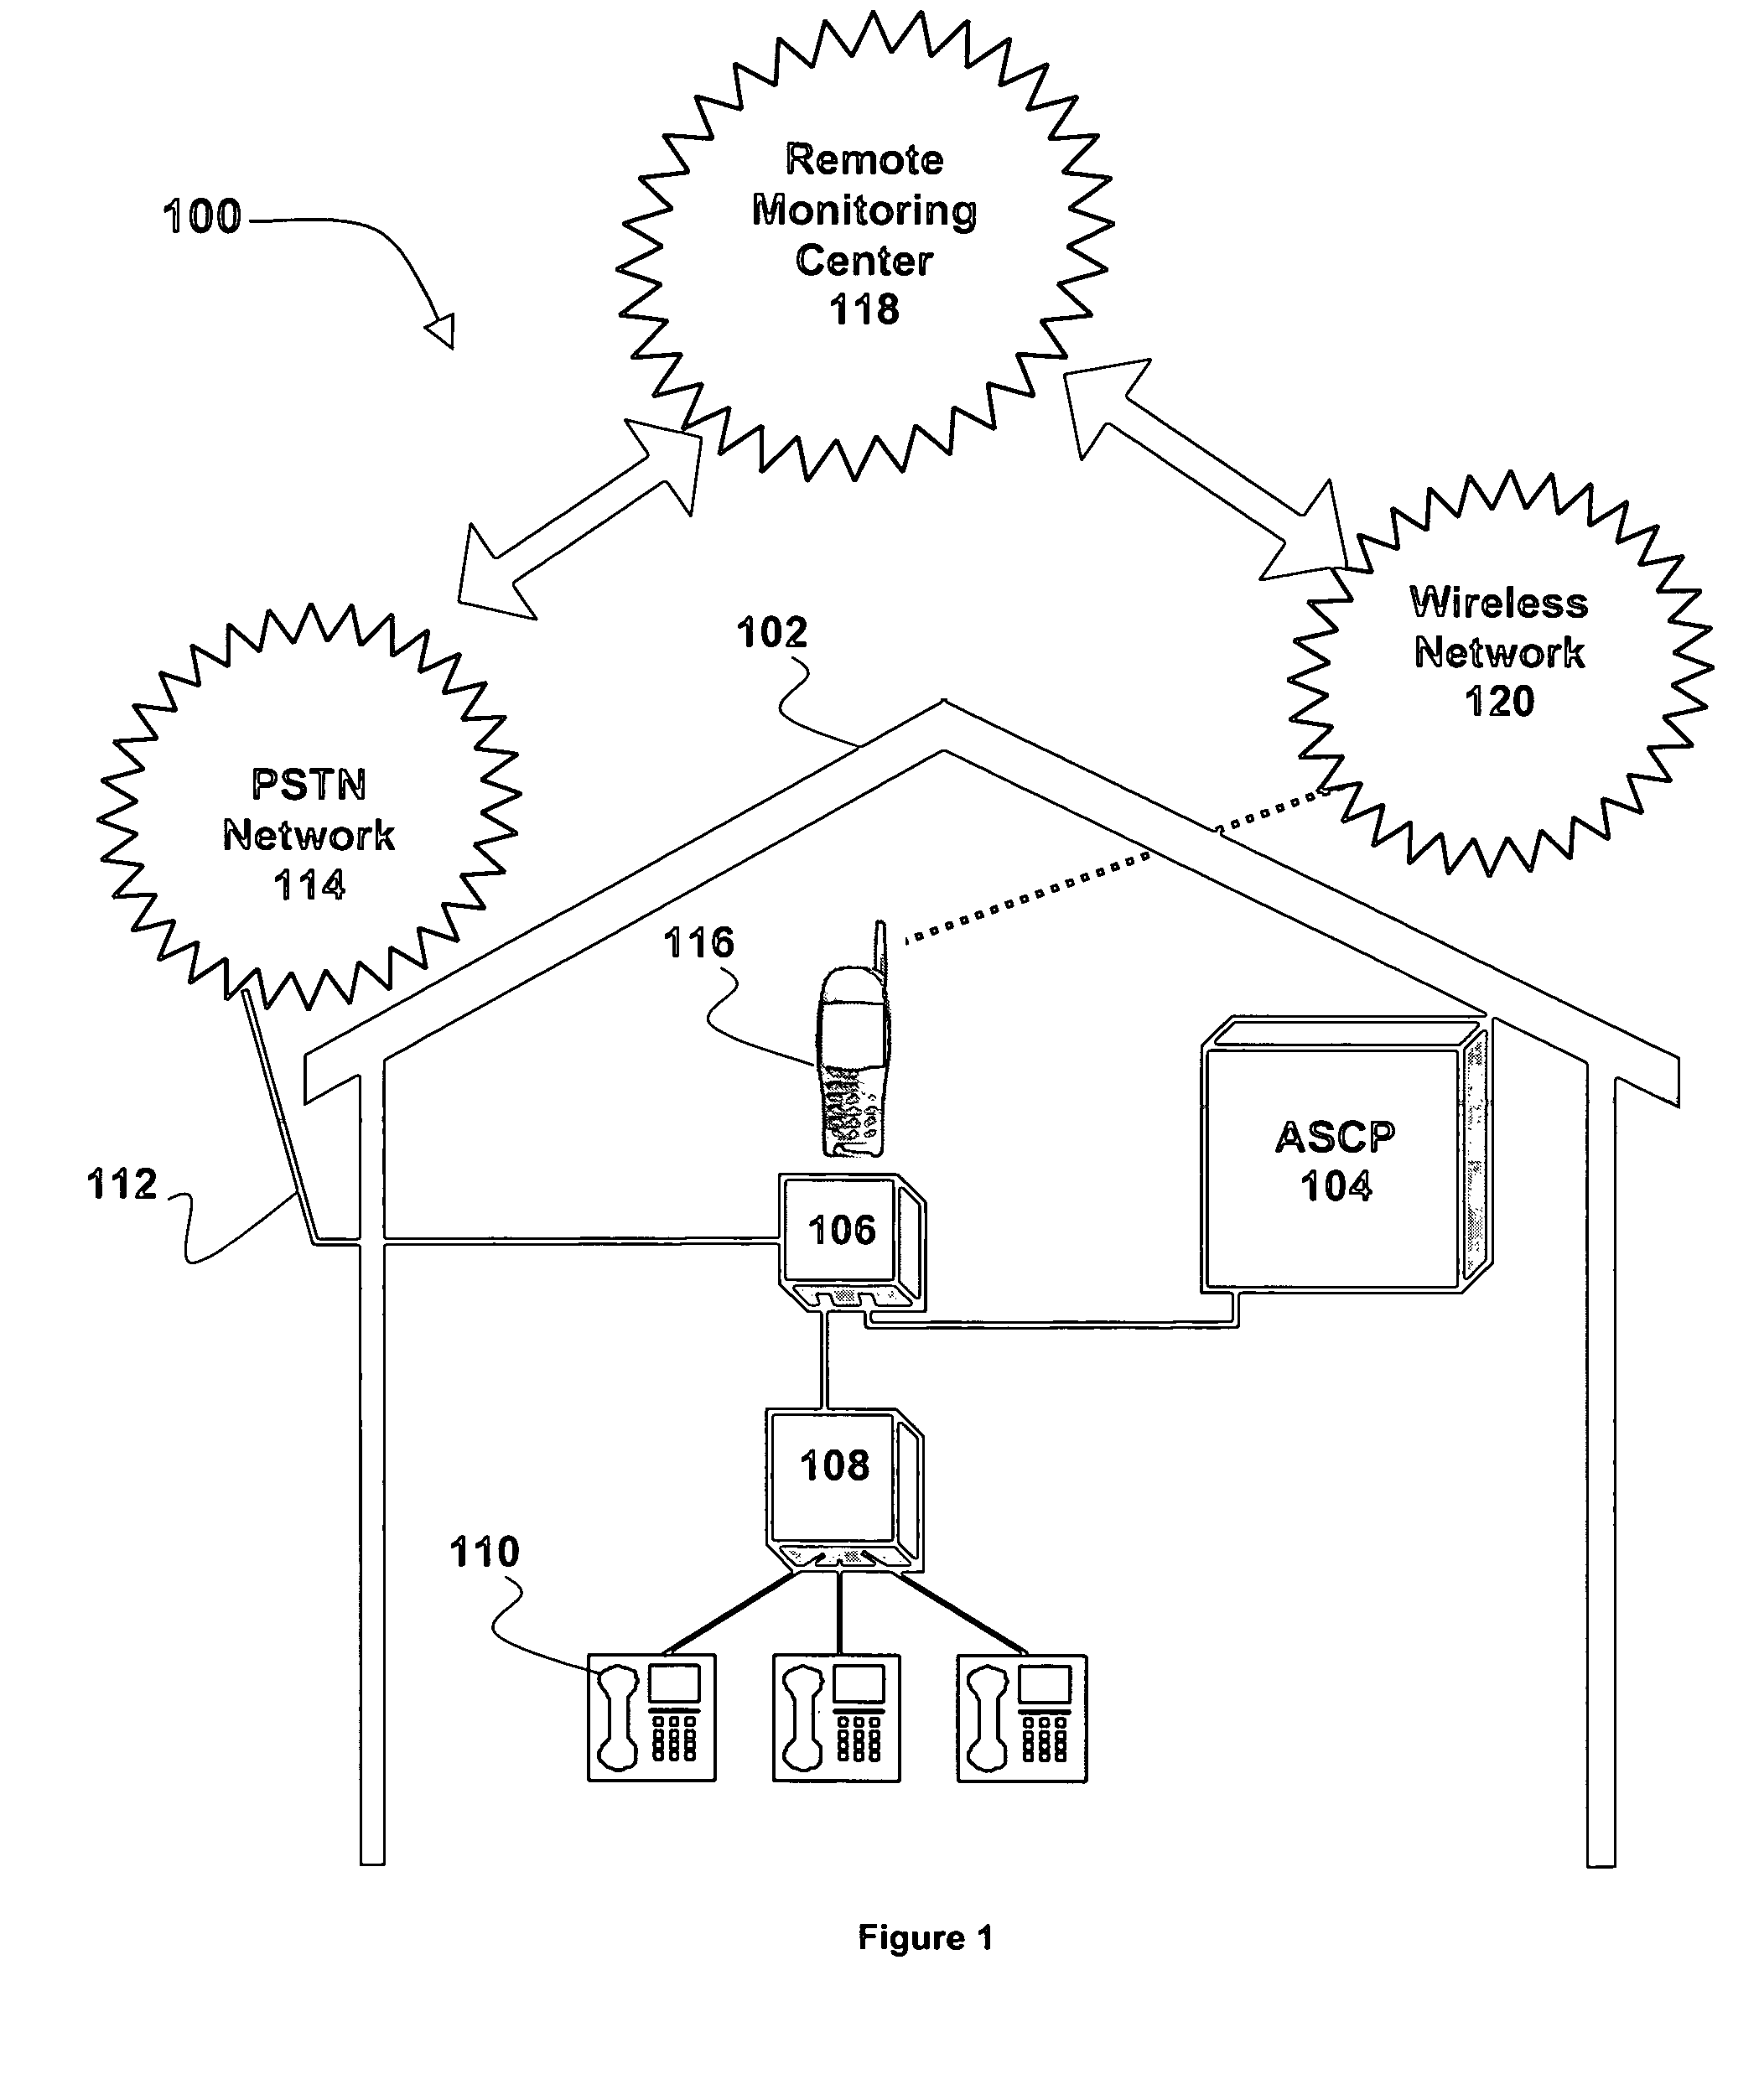 Systems and methods for providing non-dedicated wireless backup service for monitored security systems via Bluetooth